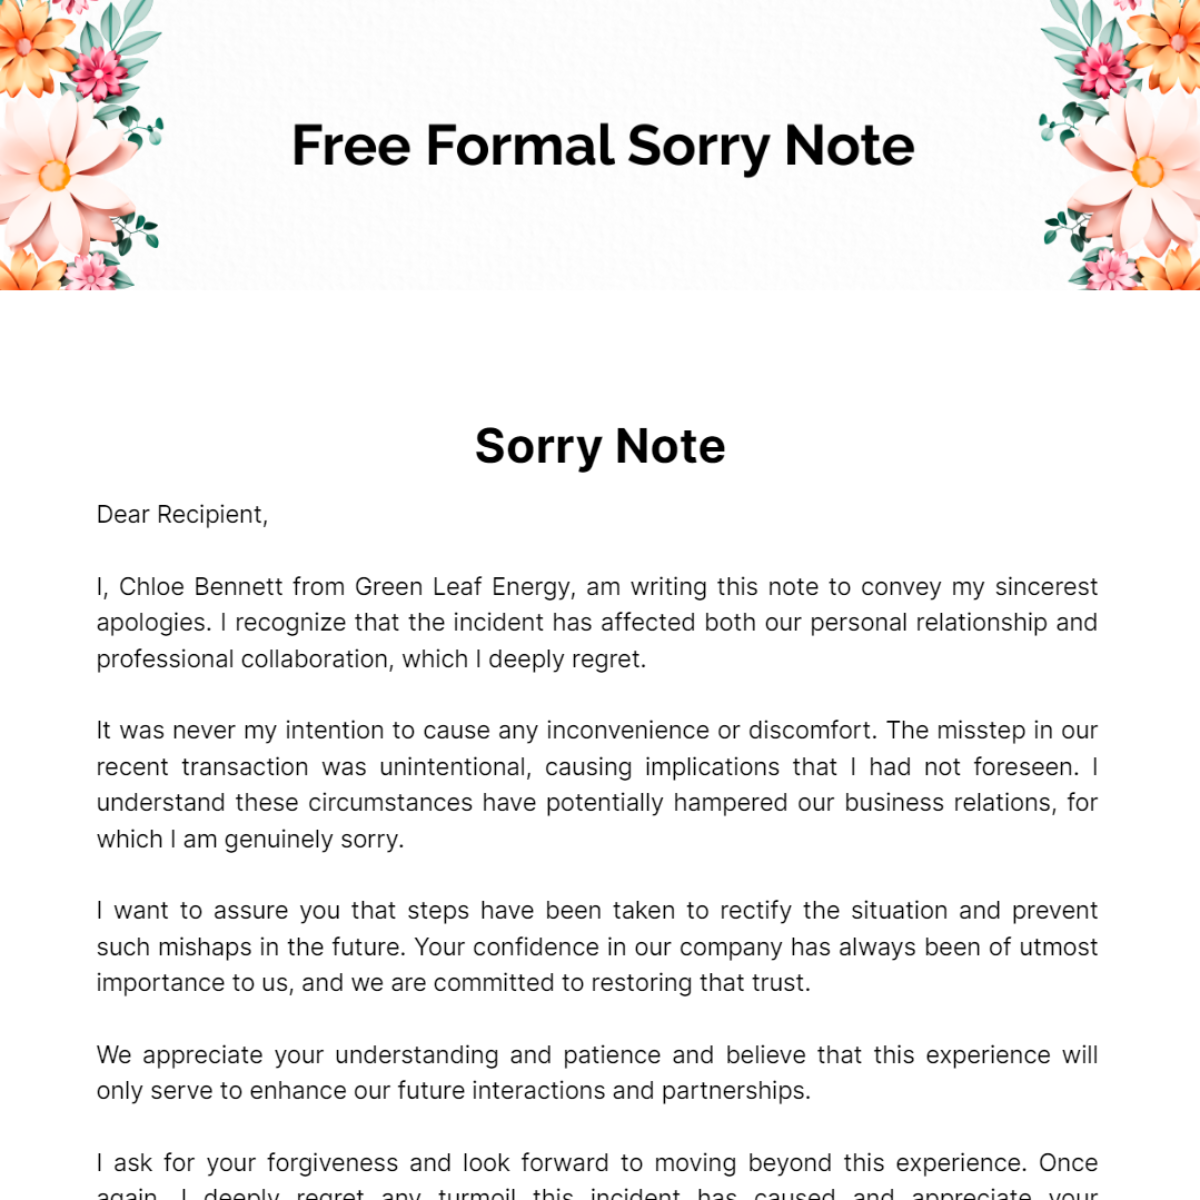 Free Formal Sorry Note Template